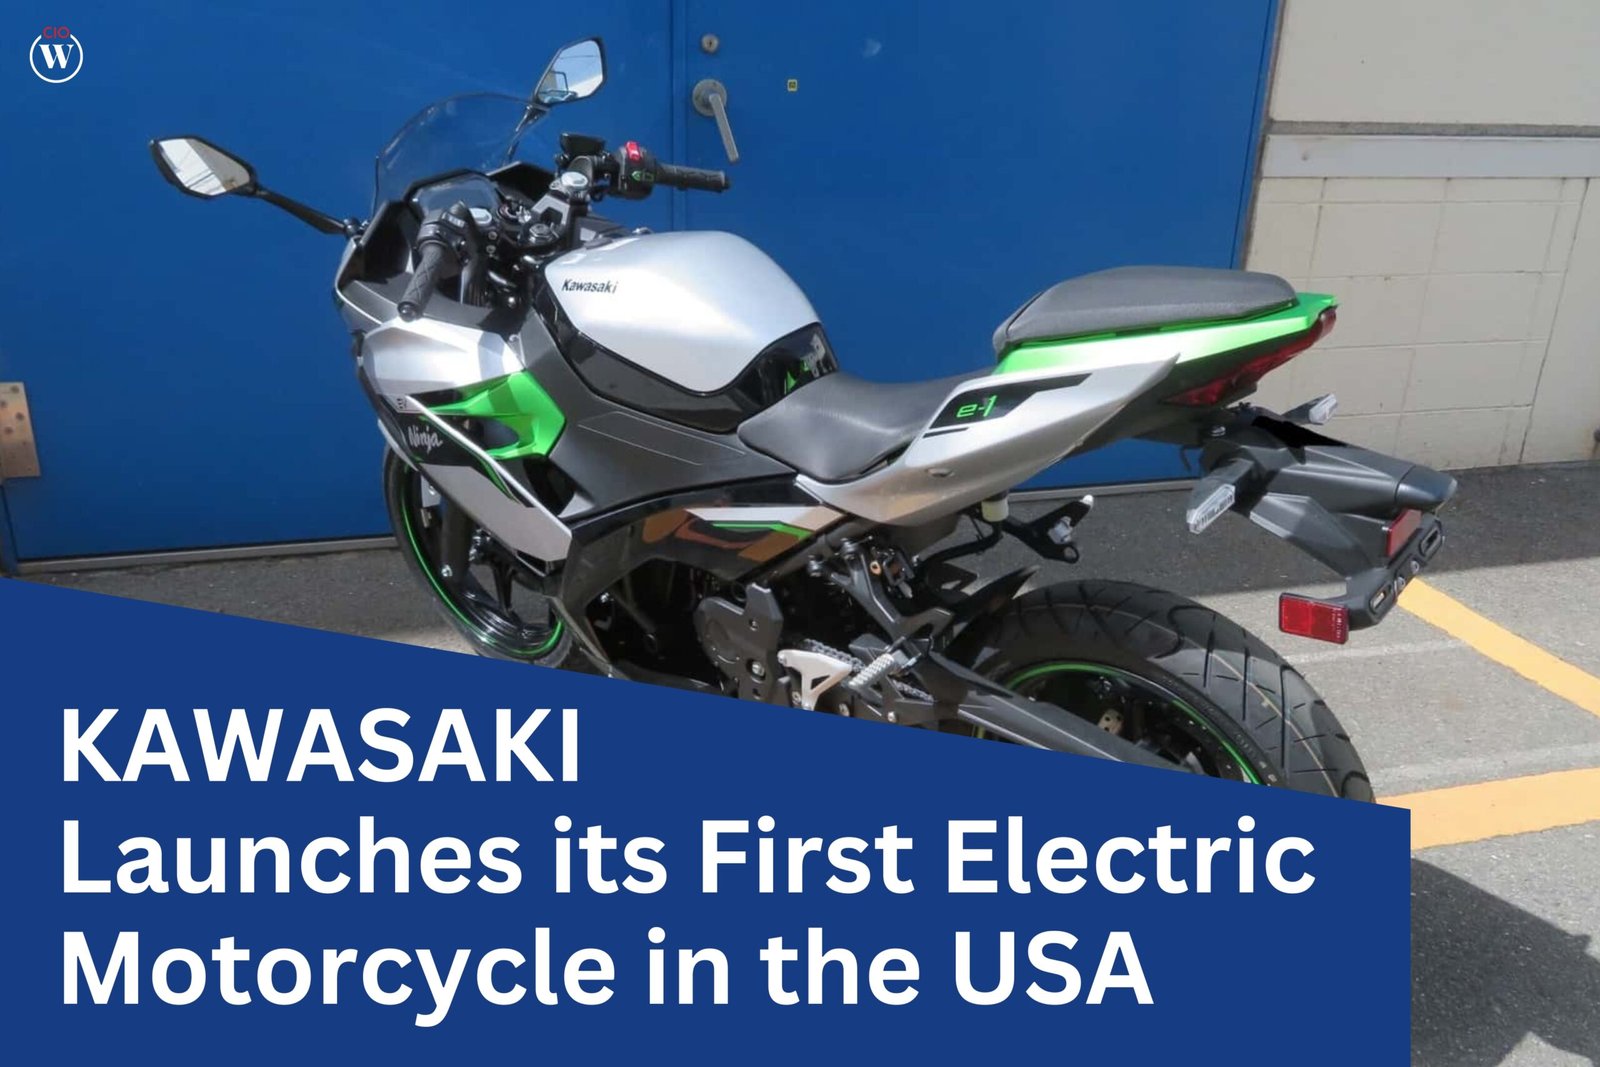 Kawasaki launches its First Electric Motorcycle in the USA | CIO Women Magazine